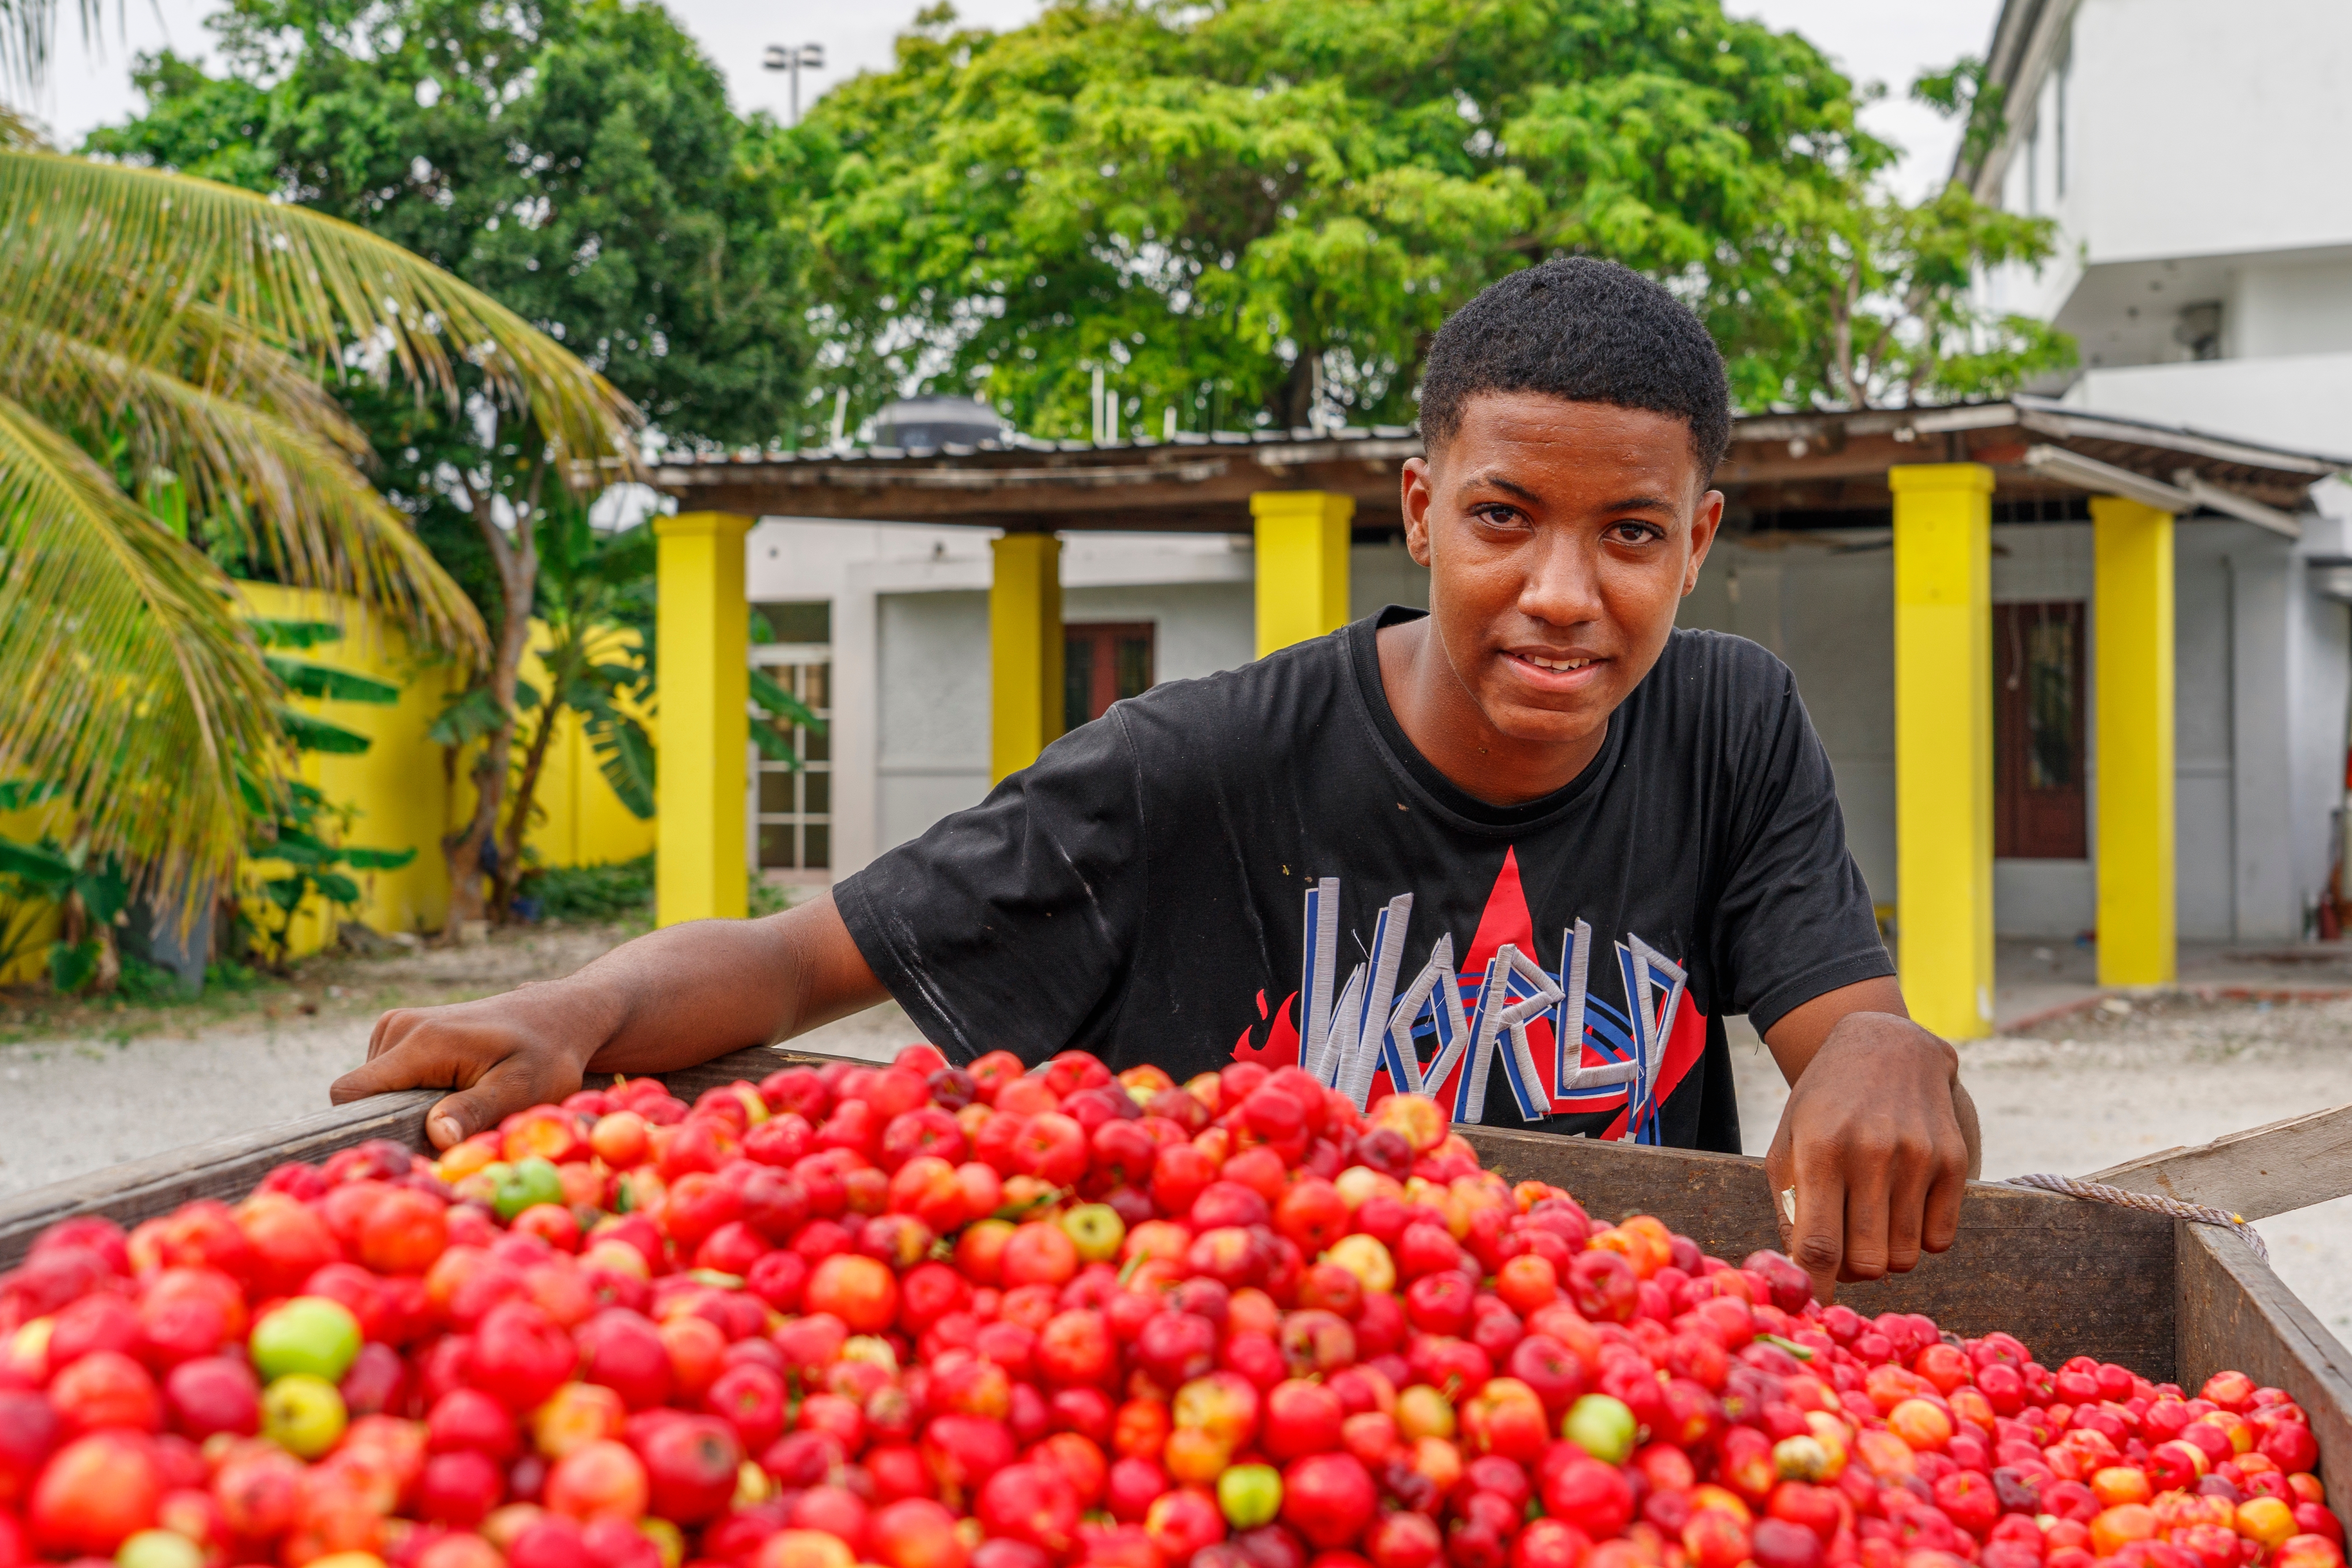 A young guy sells cherries from his garden